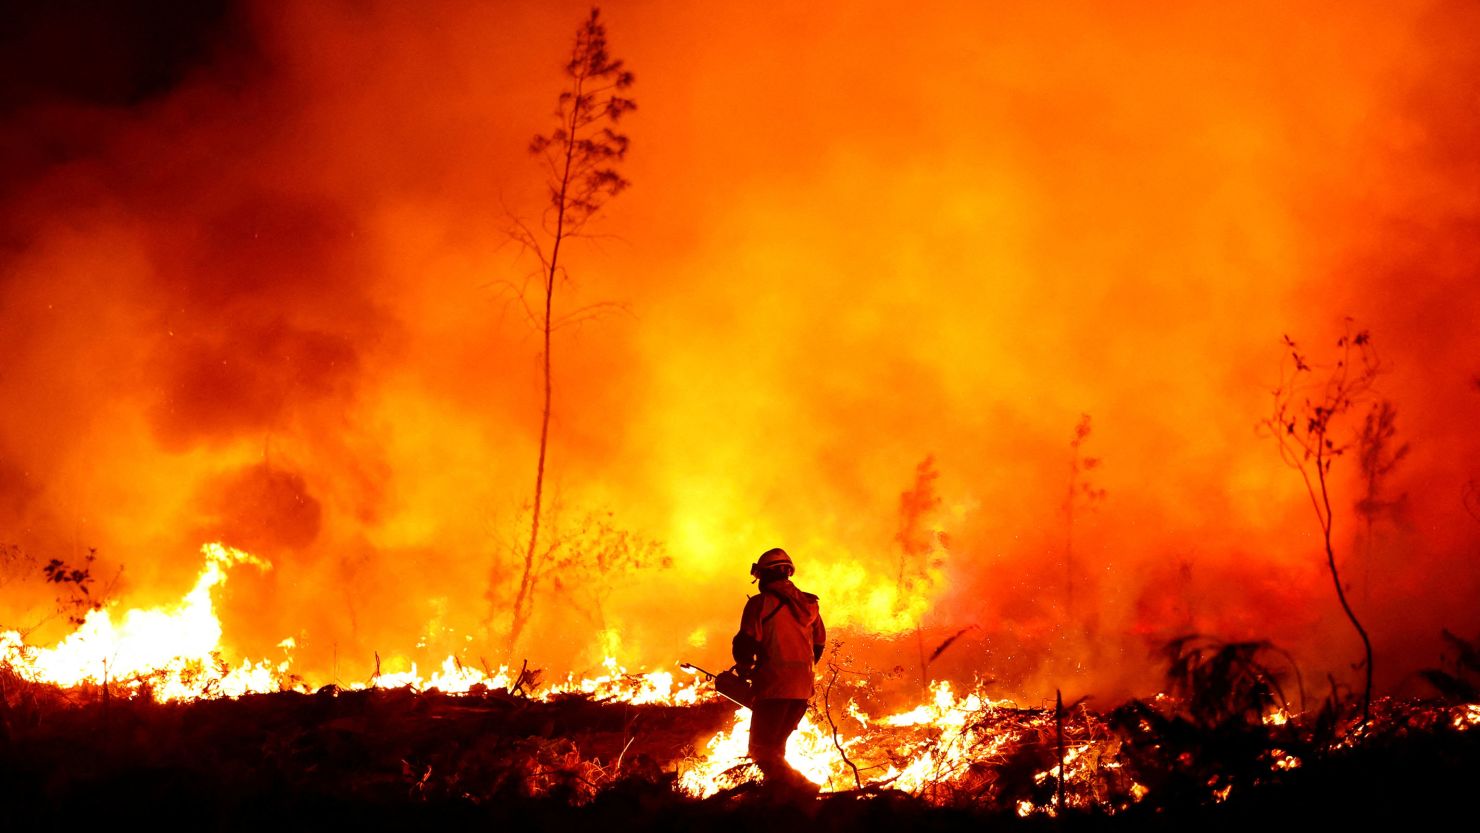 A firefighter creates a tactical fire in Louchats, as wildfires continue to spread in the Gironde region of southwestern France, July 17, 2022.